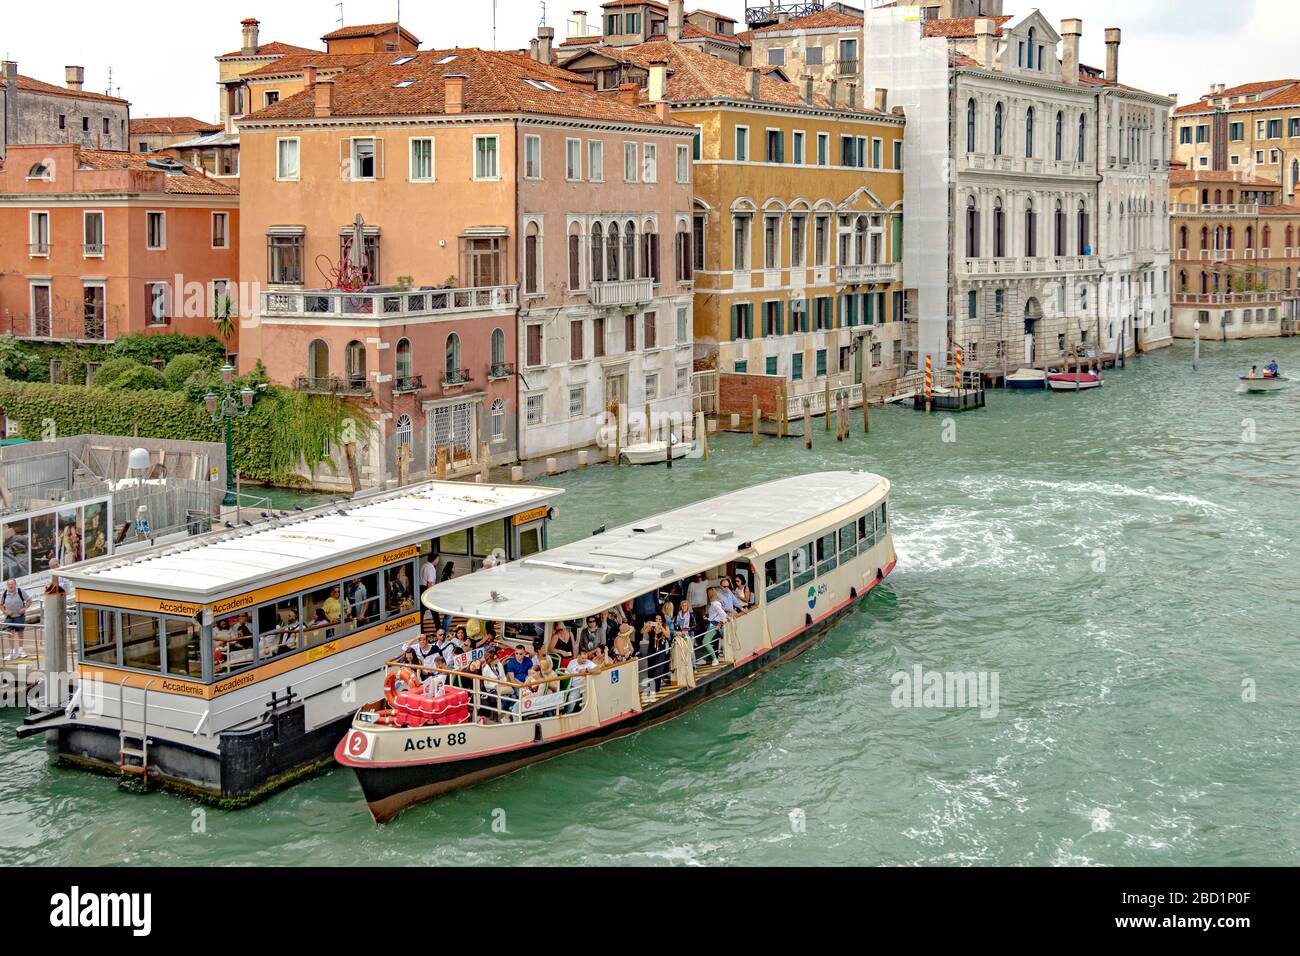 A route No 2 Vaporetto or water bus packed with passengers at the Accademia  Vaporetto stop on The Grand Canal in Venice,Italy Stock Photo - Alamy